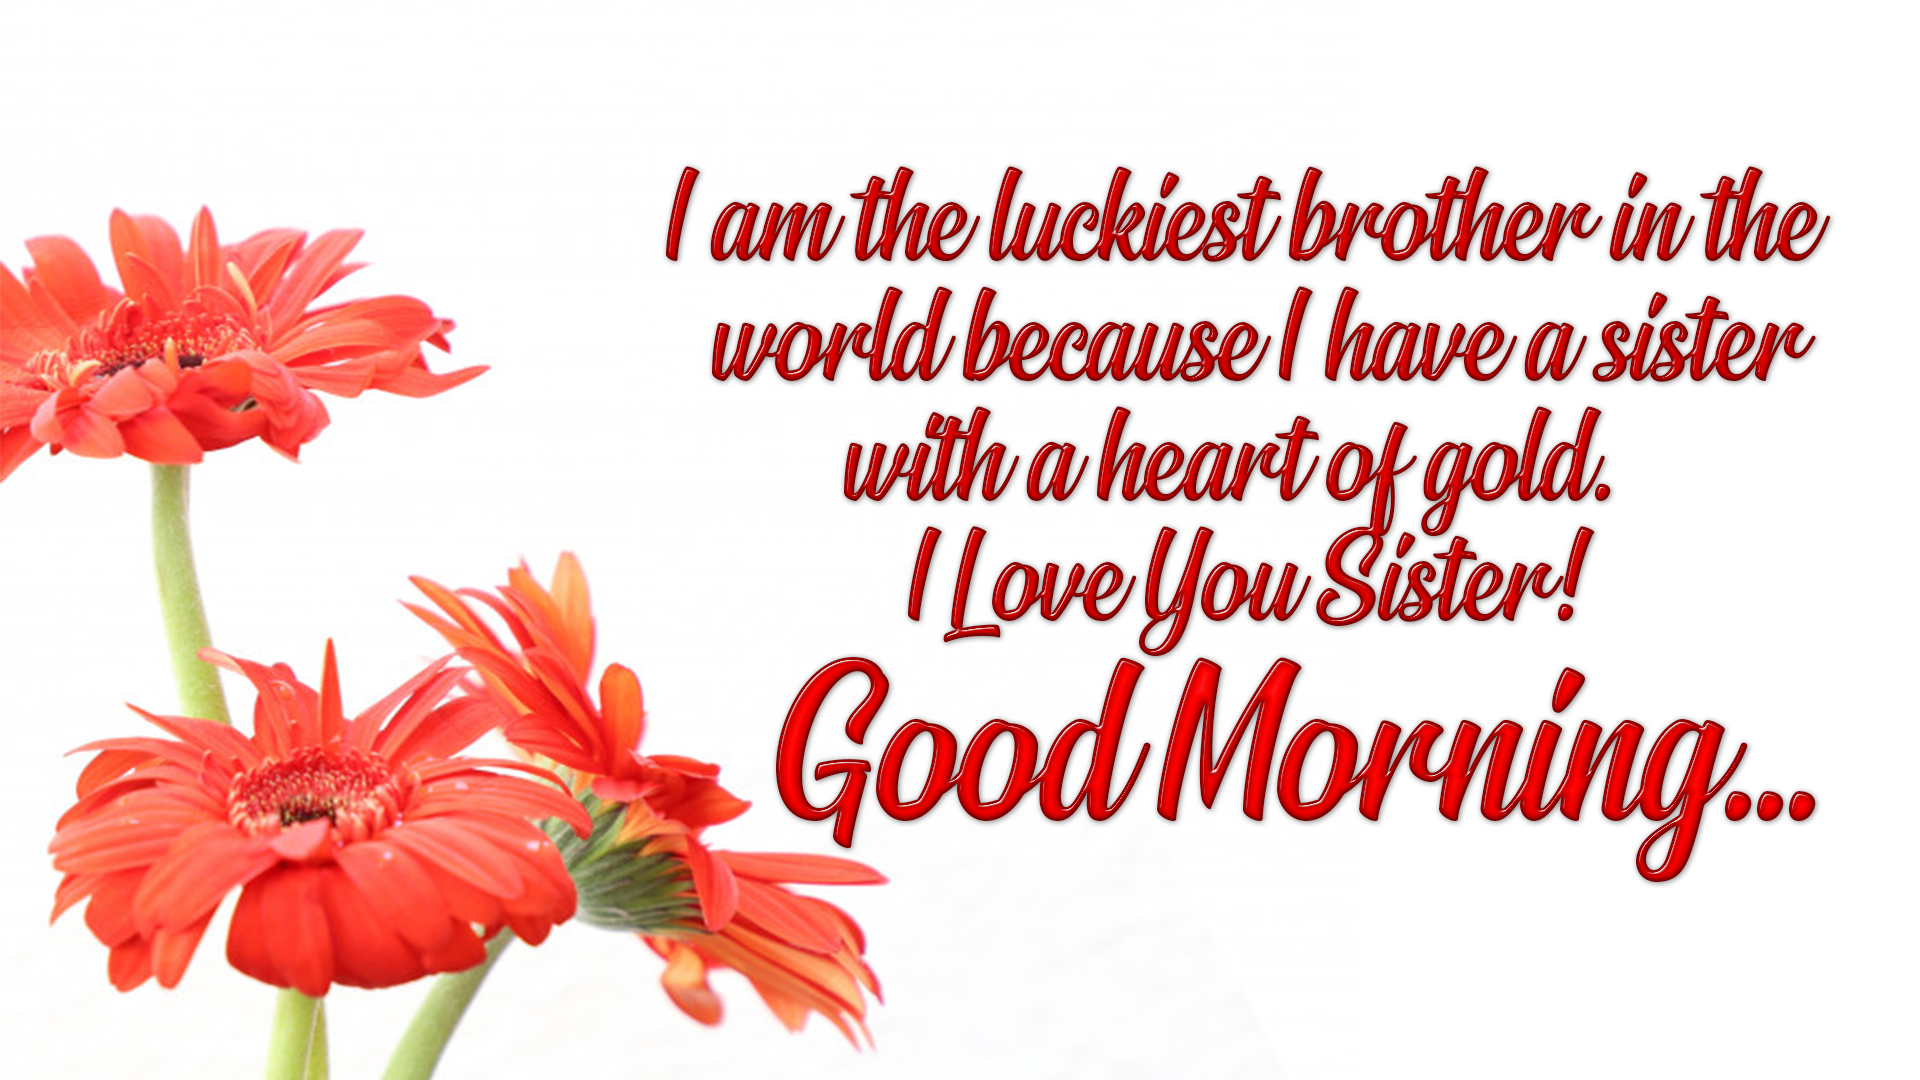 morning greetings for sister image